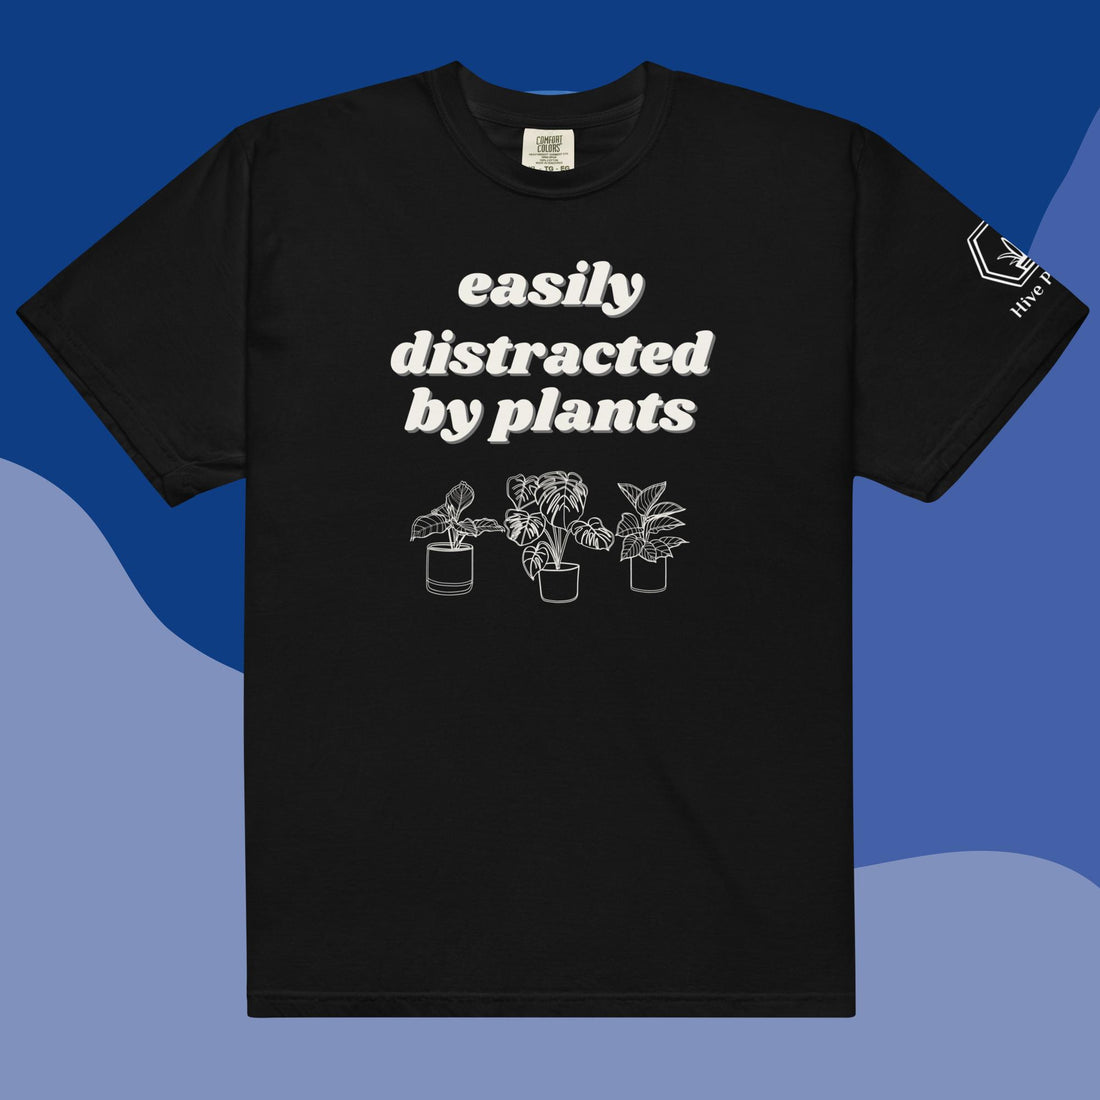 easily distracted by plants - Comfort Colors T-shirt - Hive Plants - 